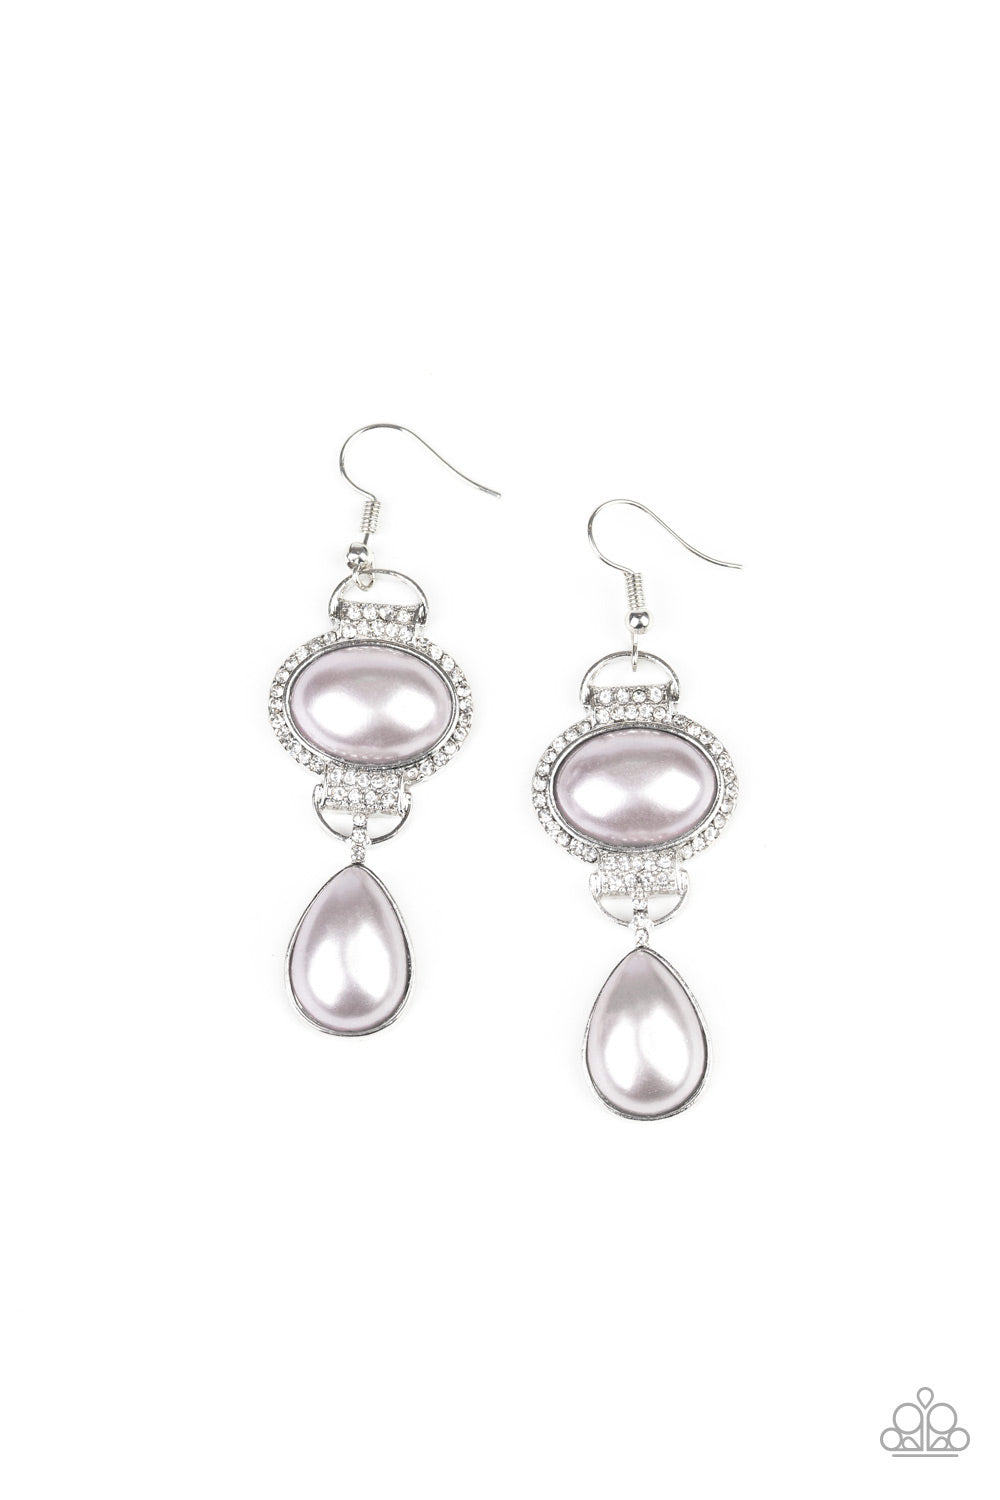 ICY SHIMMER - SILVER EARRING